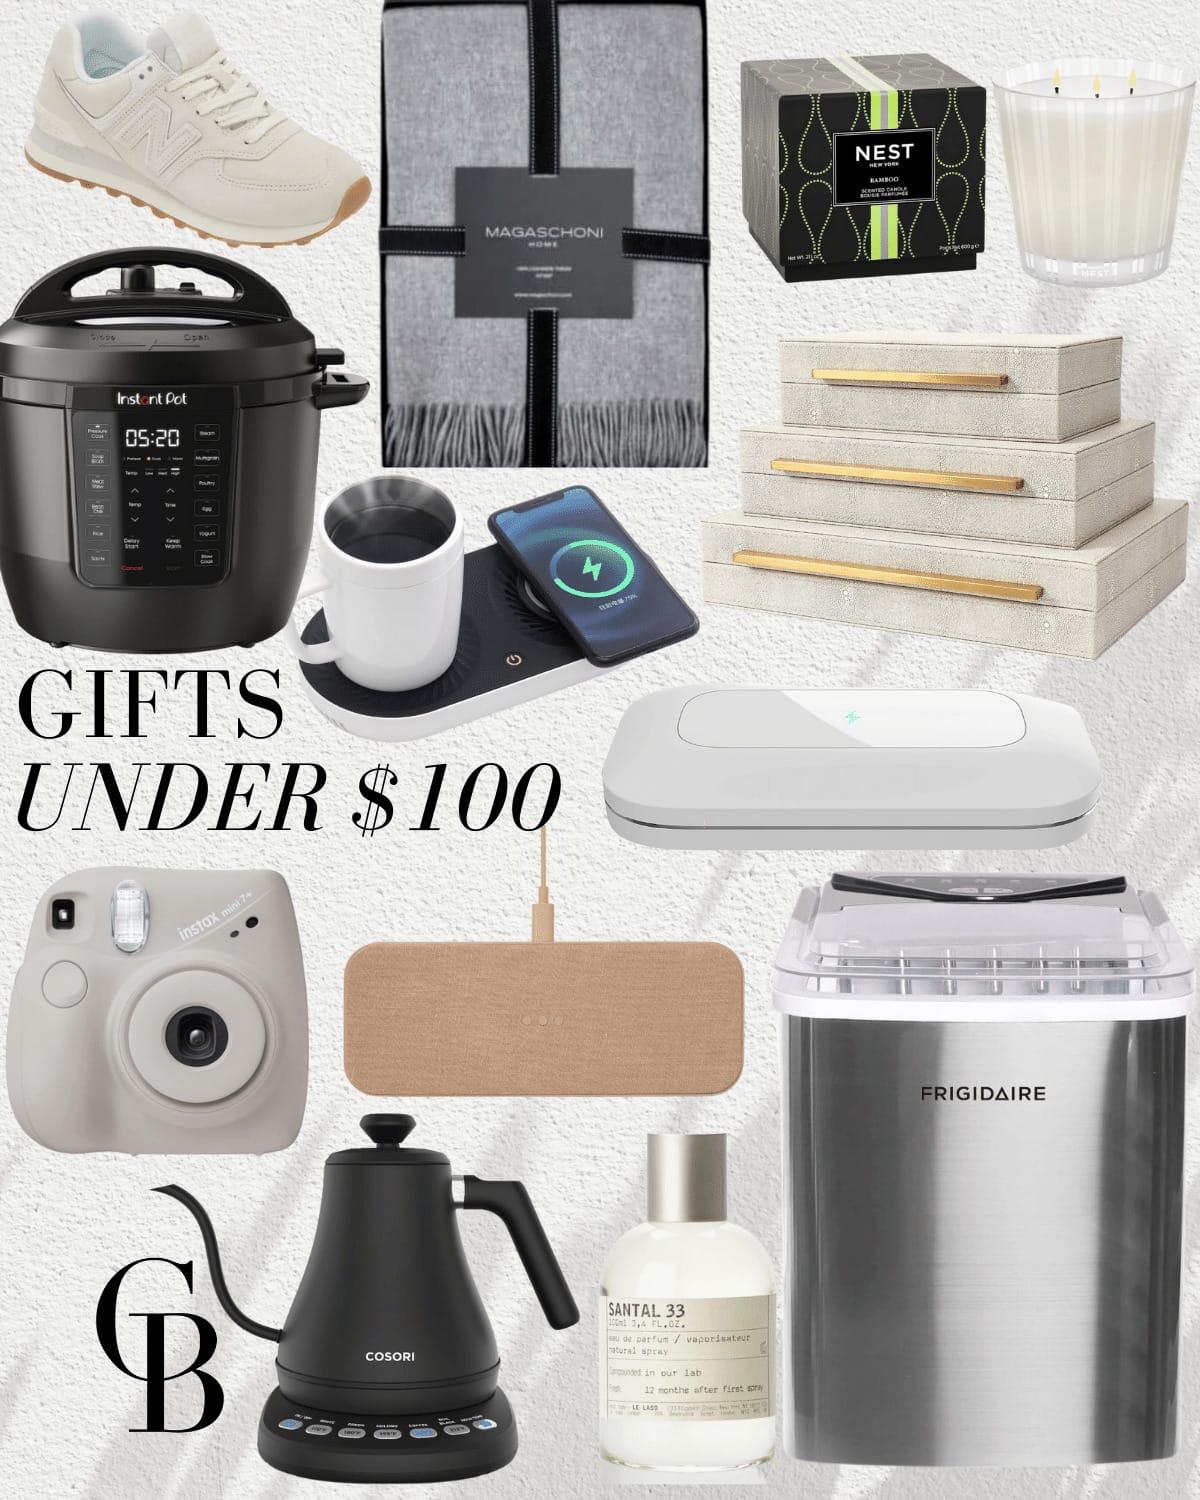 10 holiday gift guides everyone will love | #holiday #giftguide #christmas #giftideas #giftsunder100 #kitchen #polaroid #icemaker #decor #tea #charger #electronics